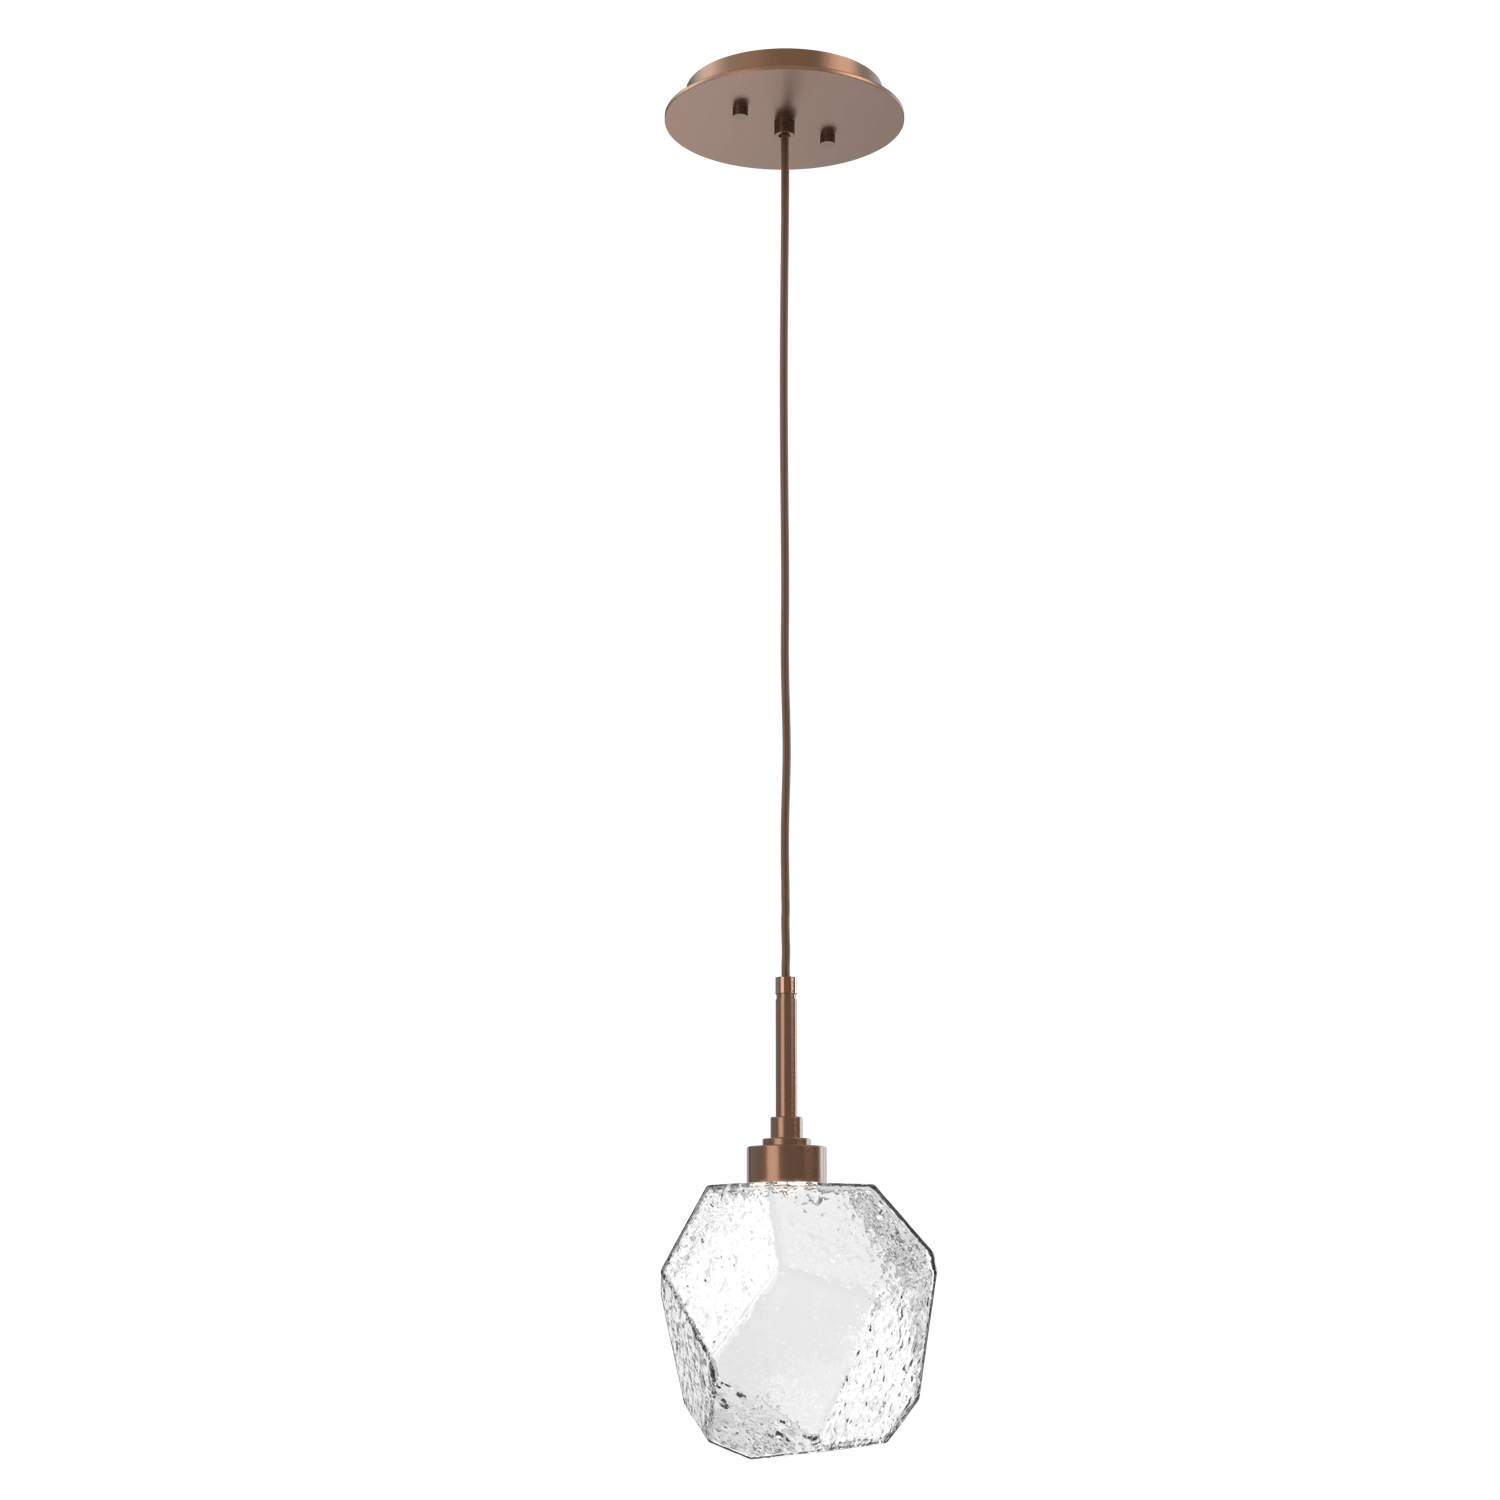 LAB0039-01-BB-C-Hammerton-Studio-Gem-pendant-light-with-burnished-bronze-finish-and-clear-blown-glass-shades-and-LED-lamping